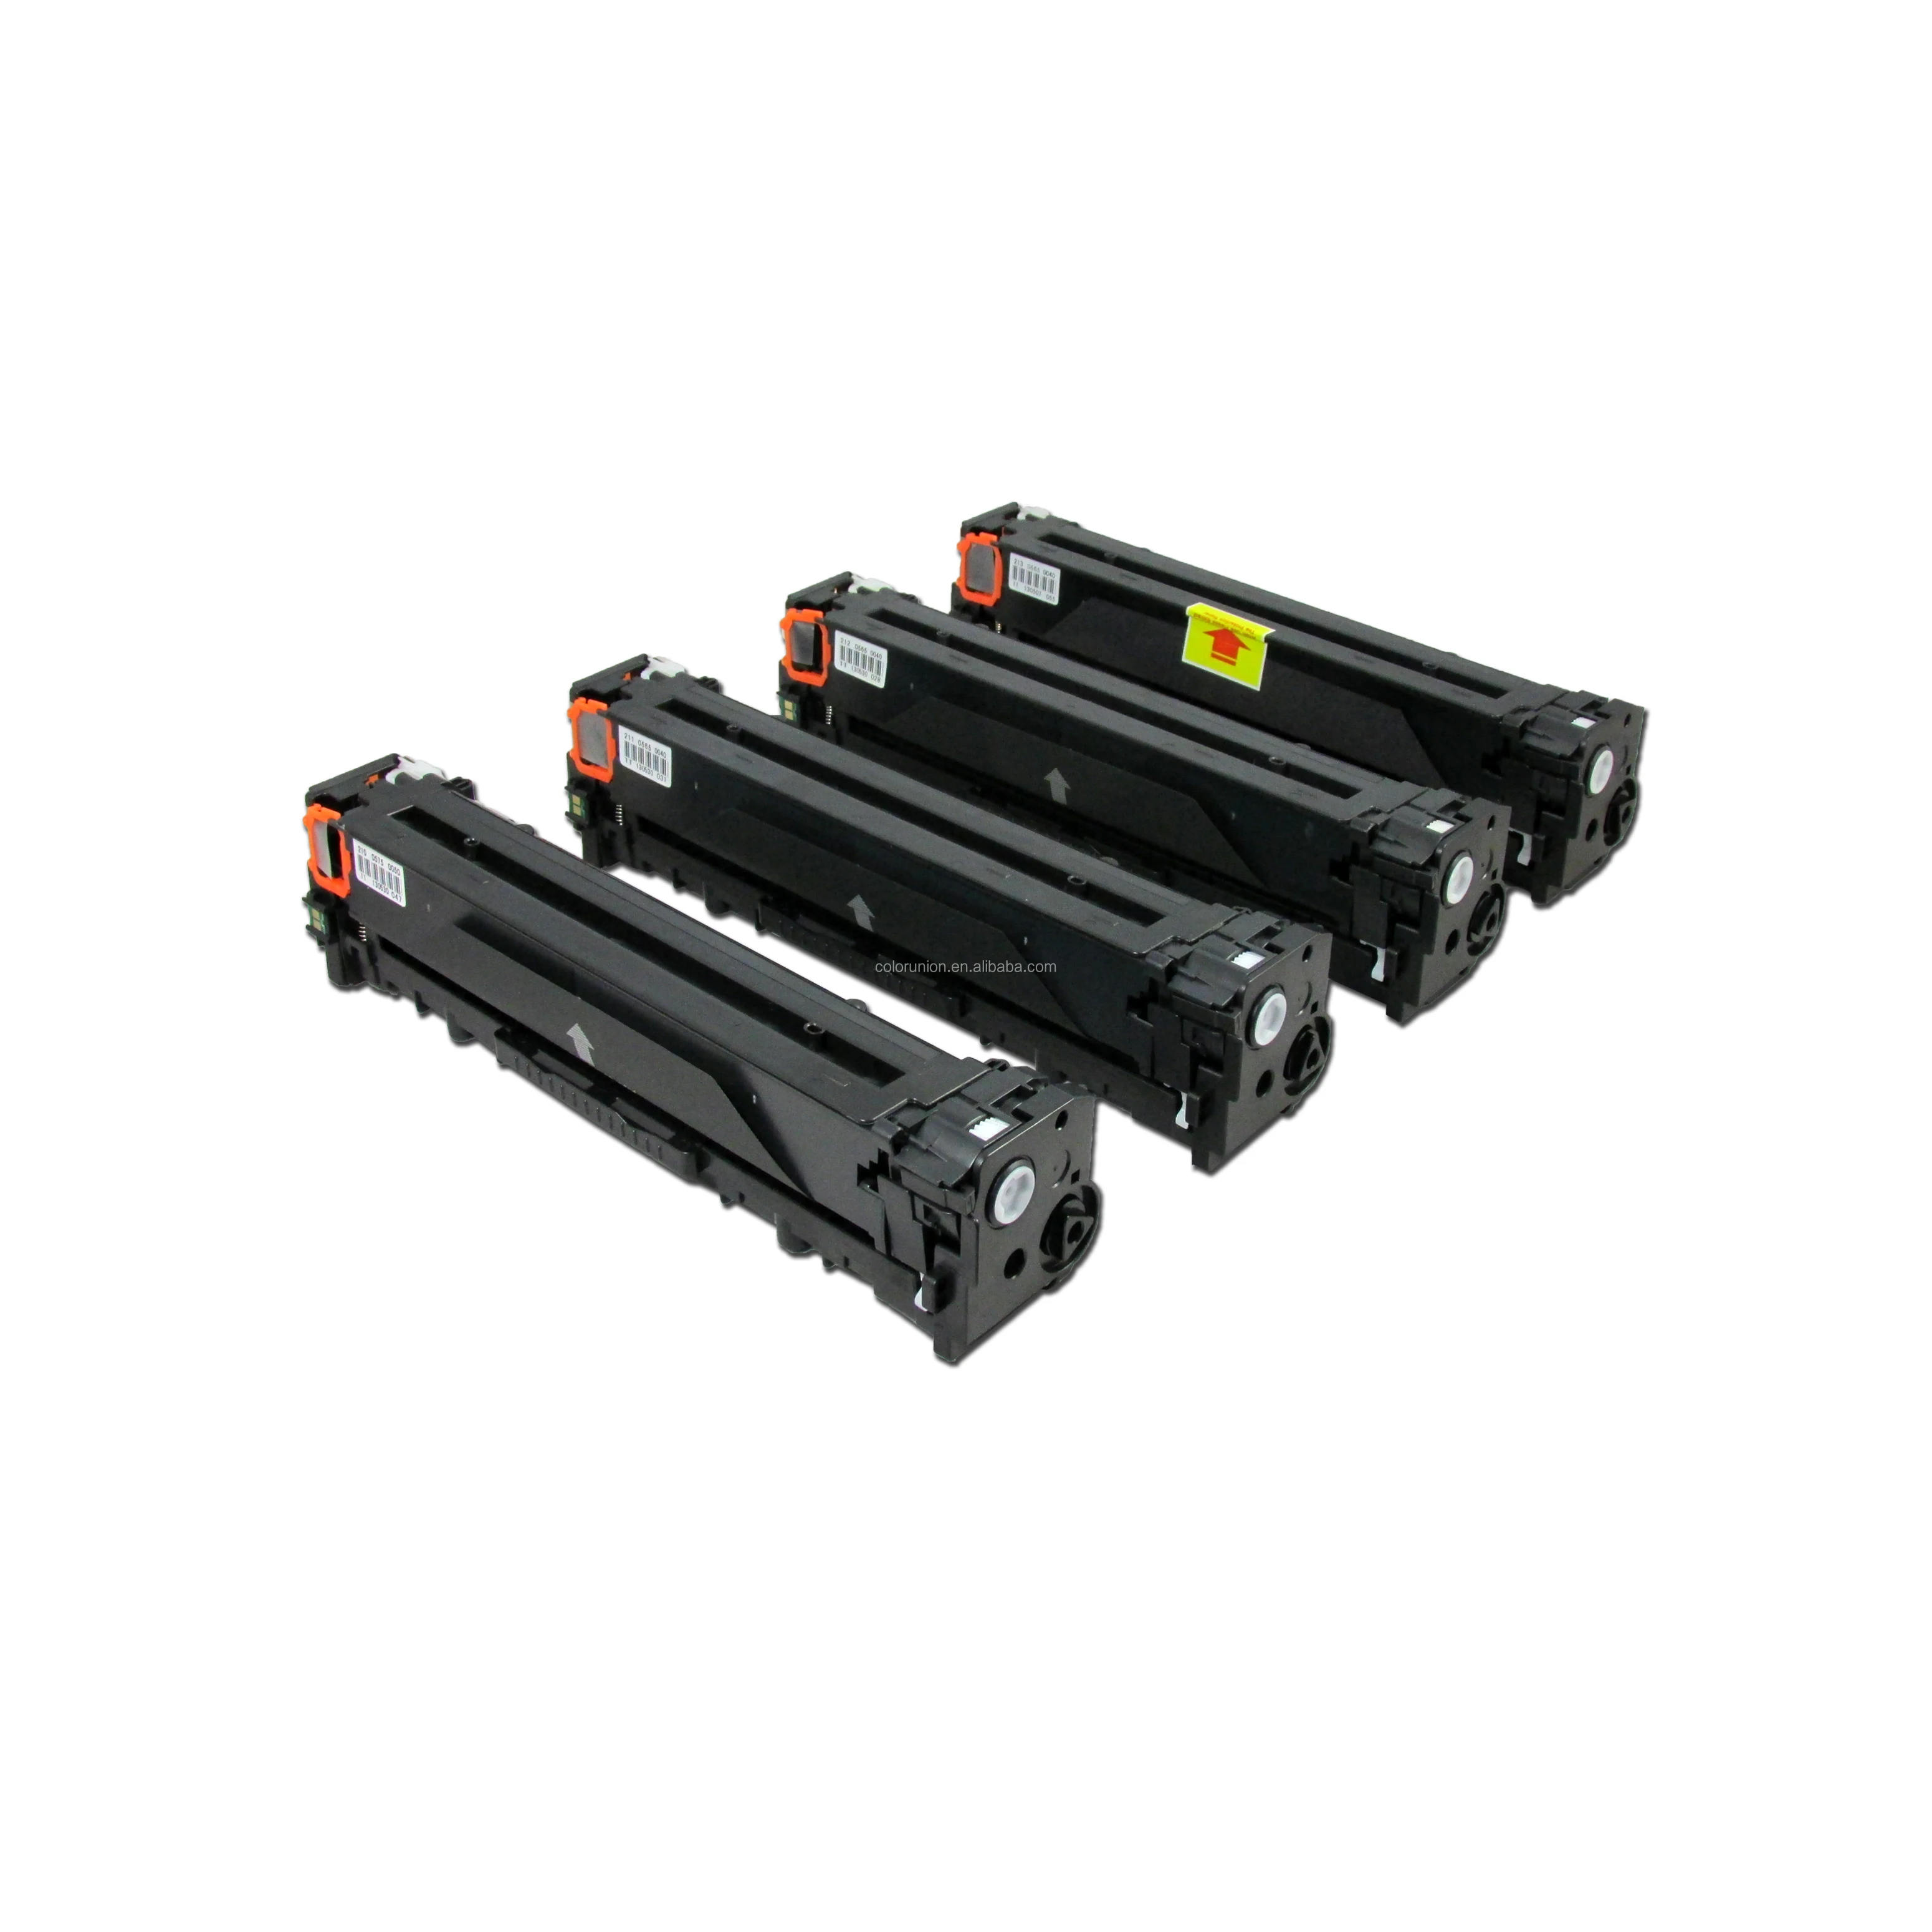 Hot selling ce210 color toner cartridge for  LASEJET PRO 200 M251NW/M276NW